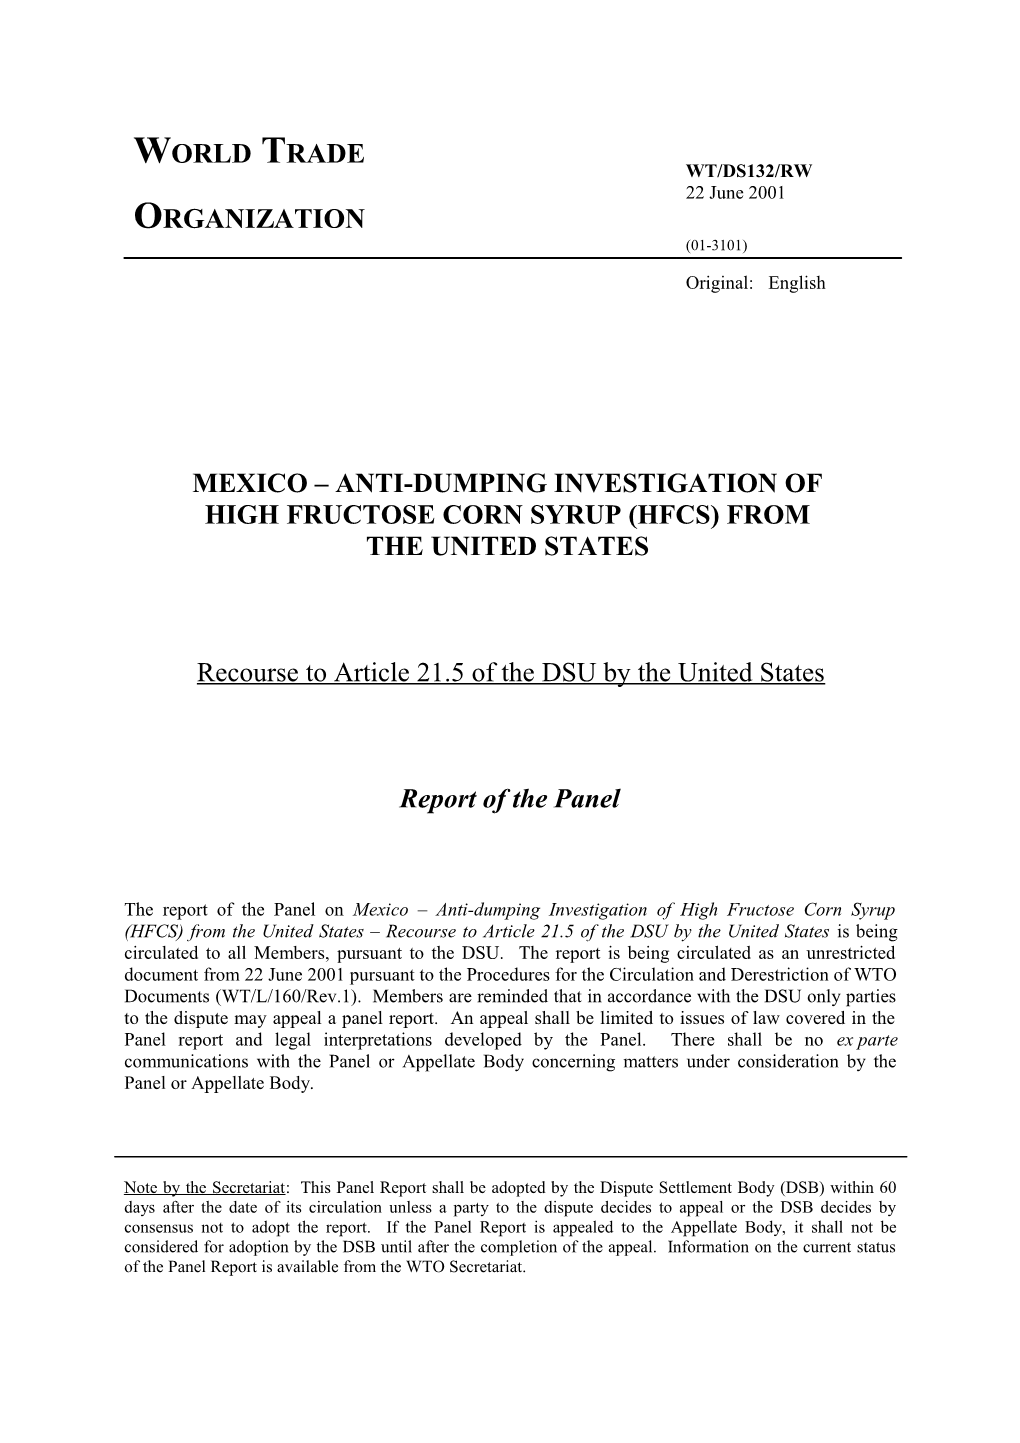 Mexico Anti-Dumping Investigation Of